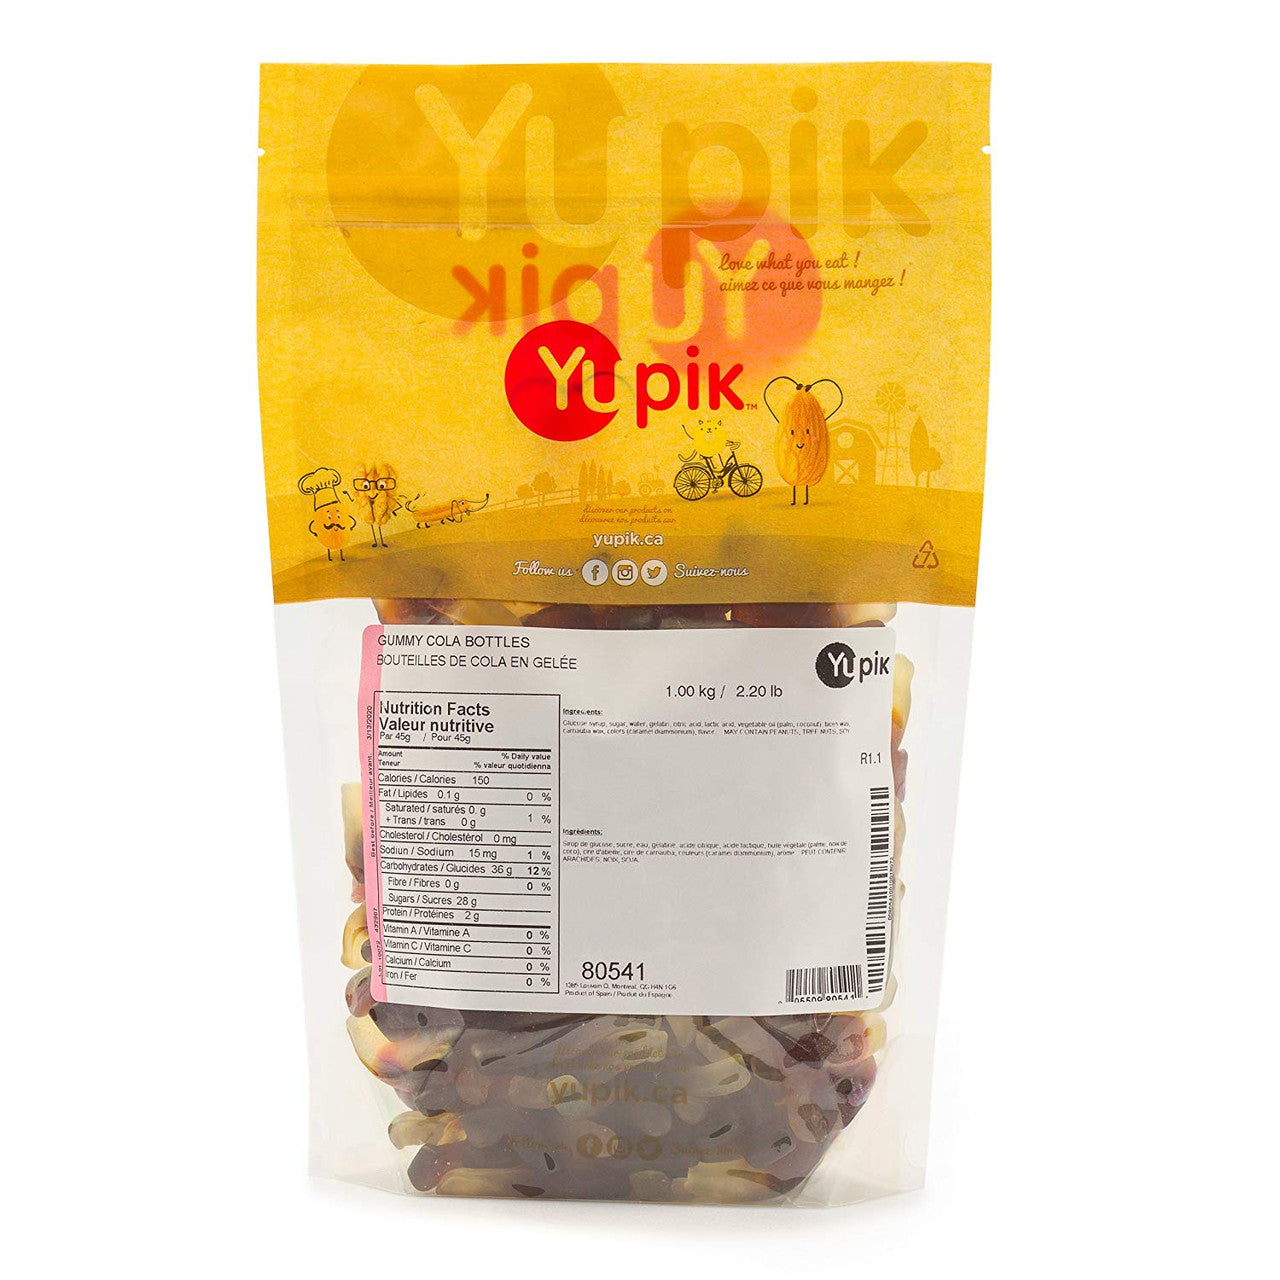 Yupik Gummy Cola Bottles, 1Kg/2.2lbs (Imported from Canada)